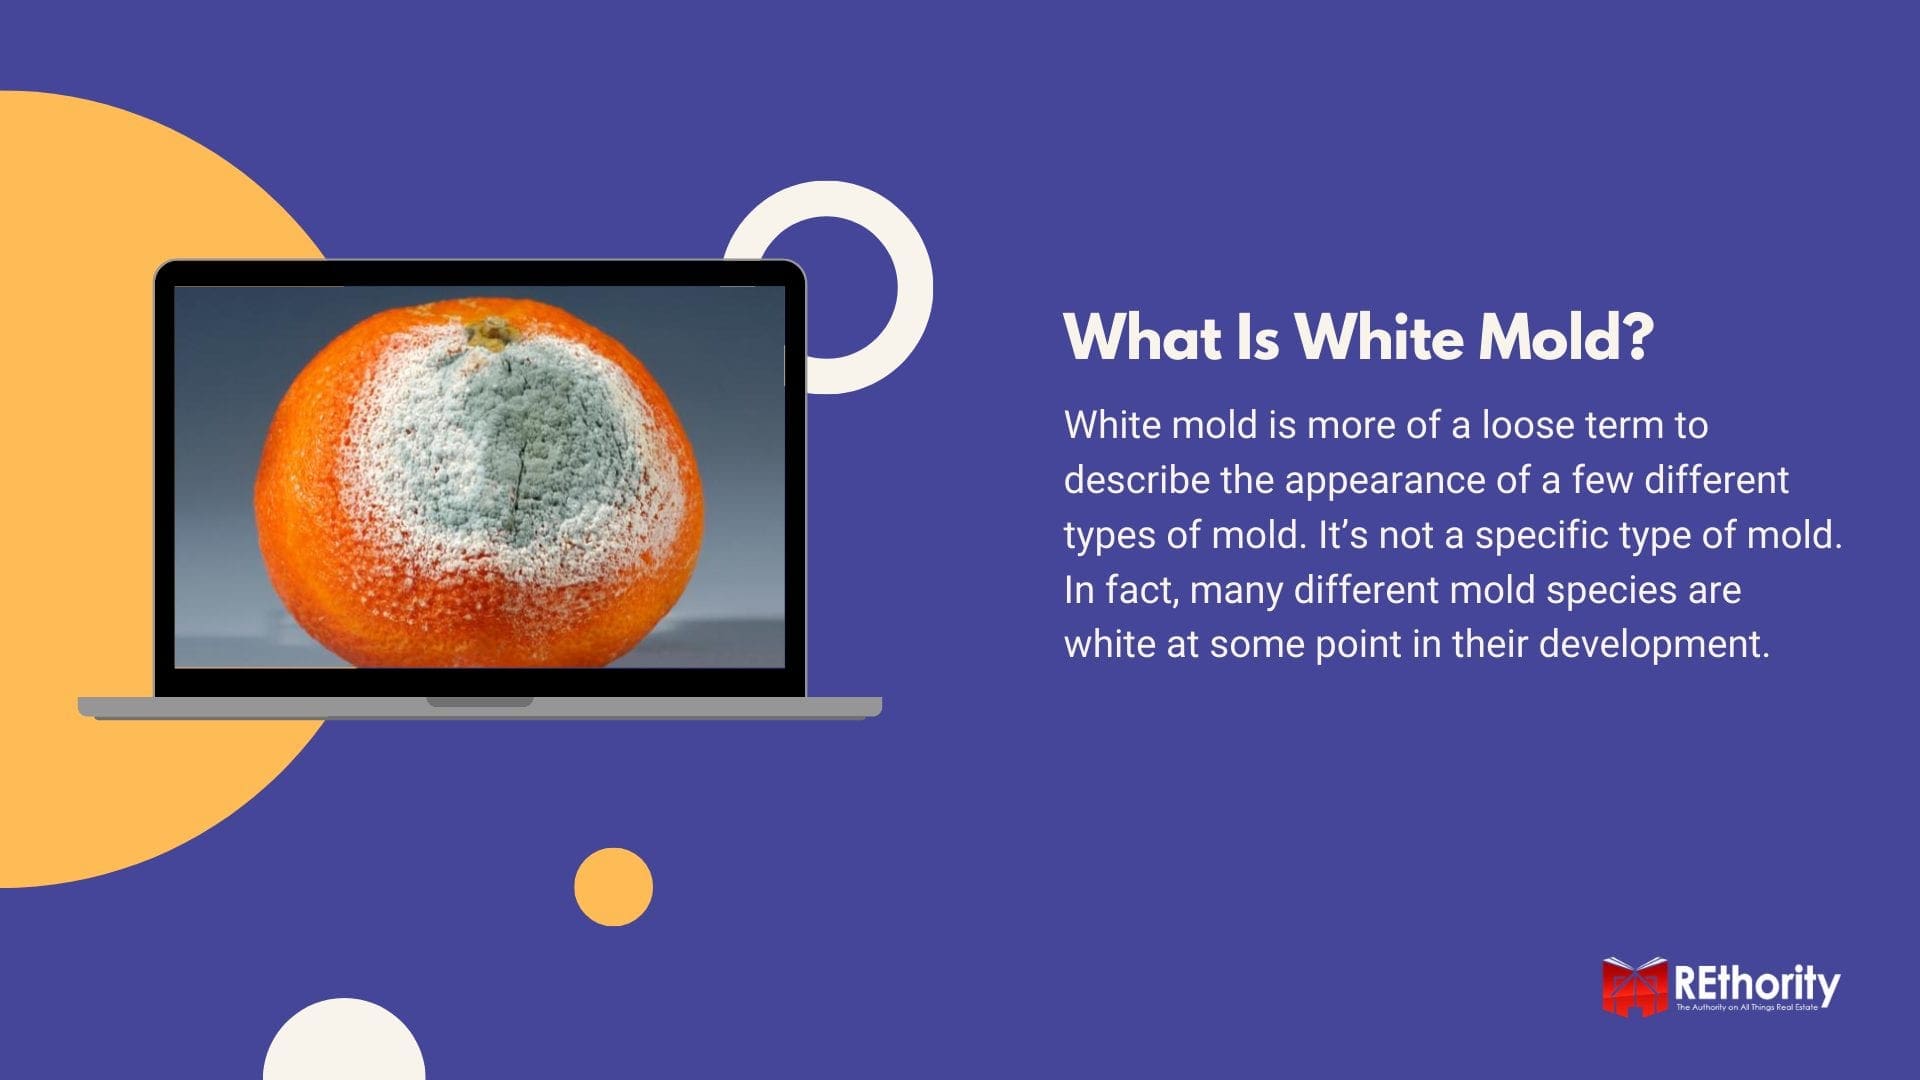 What is White Mold graphic featuring penicillium growing on an orange displayed on a computer screen alongside a description answering the question